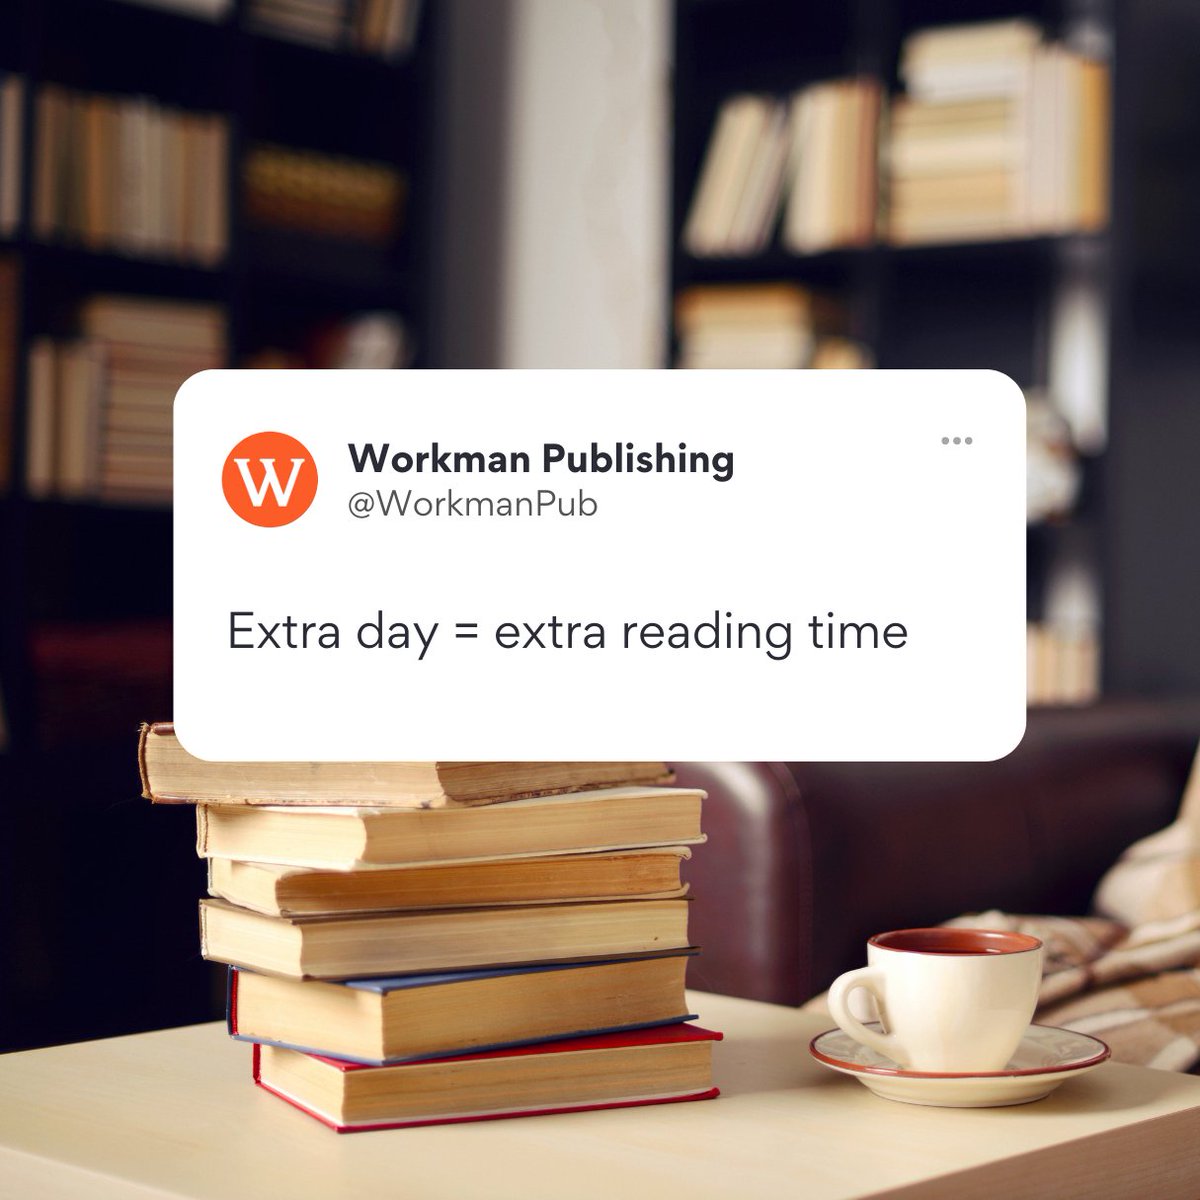 Us 🤝 using every holiday as an excuse to read. #HappyLeapDay